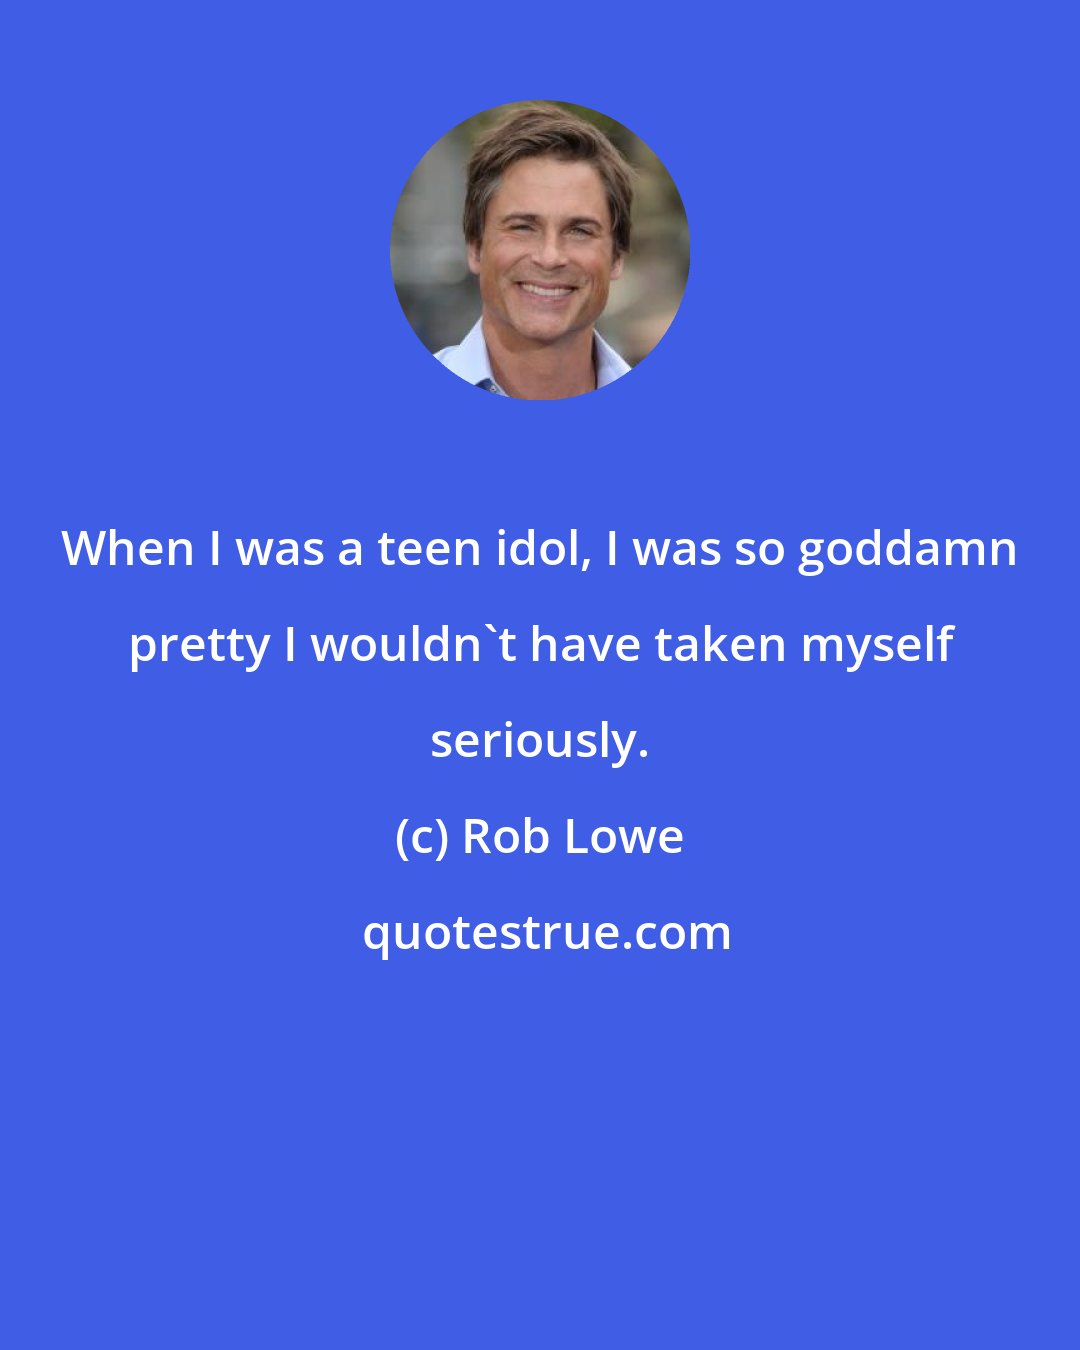 Rob Lowe: When I was a teen idol, I was so goddamn pretty I wouldn't have taken myself seriously.